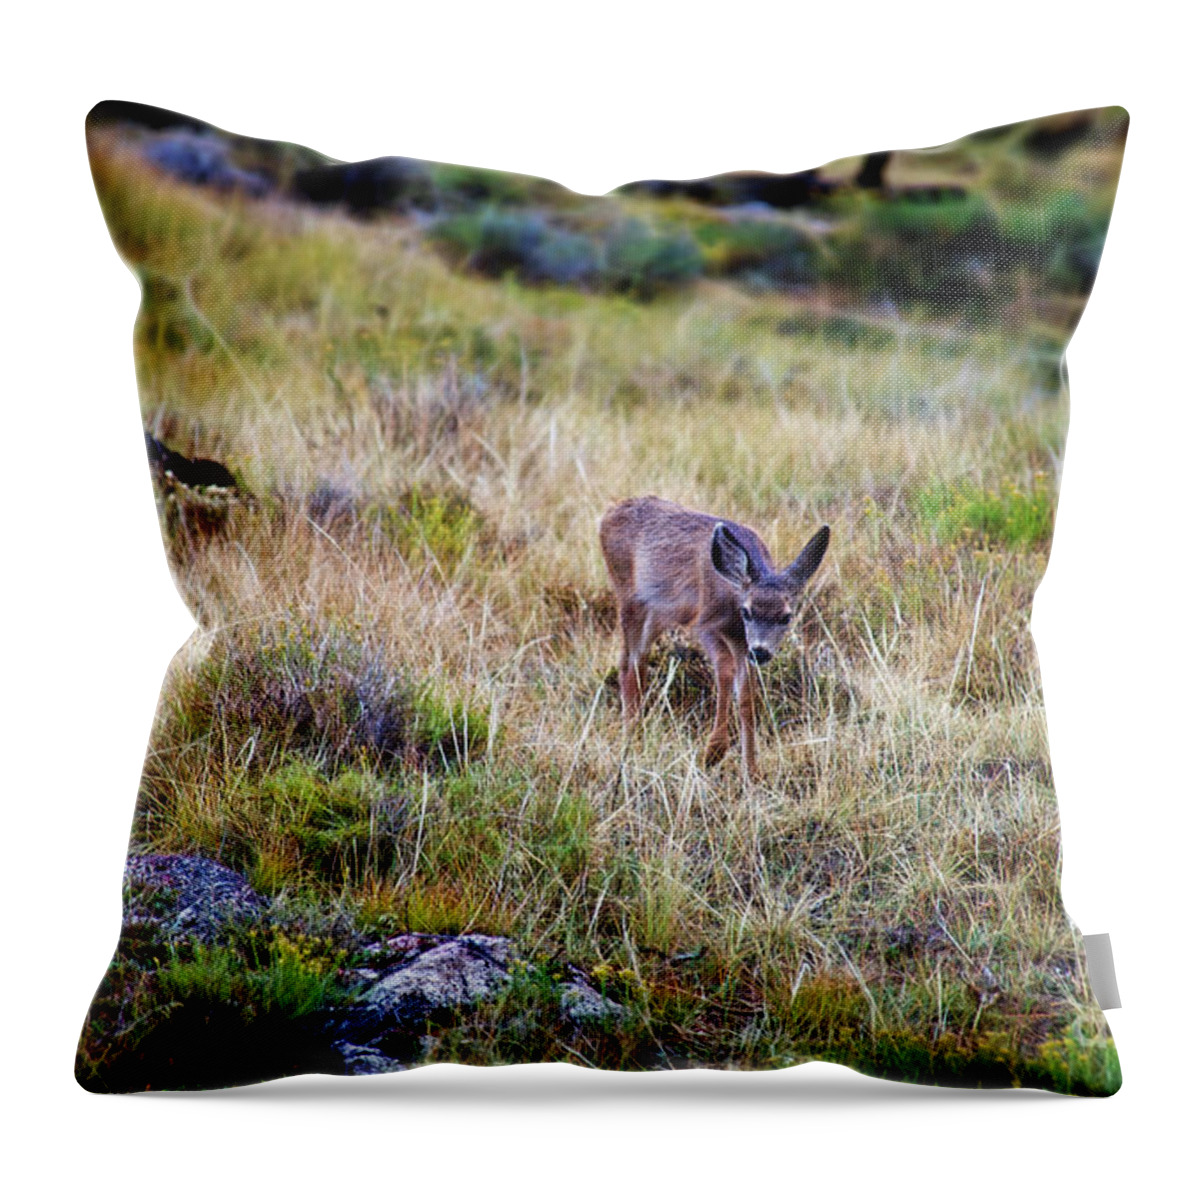 Deer Throw Pillow featuring the photograph Young Deer 2 by David Arment